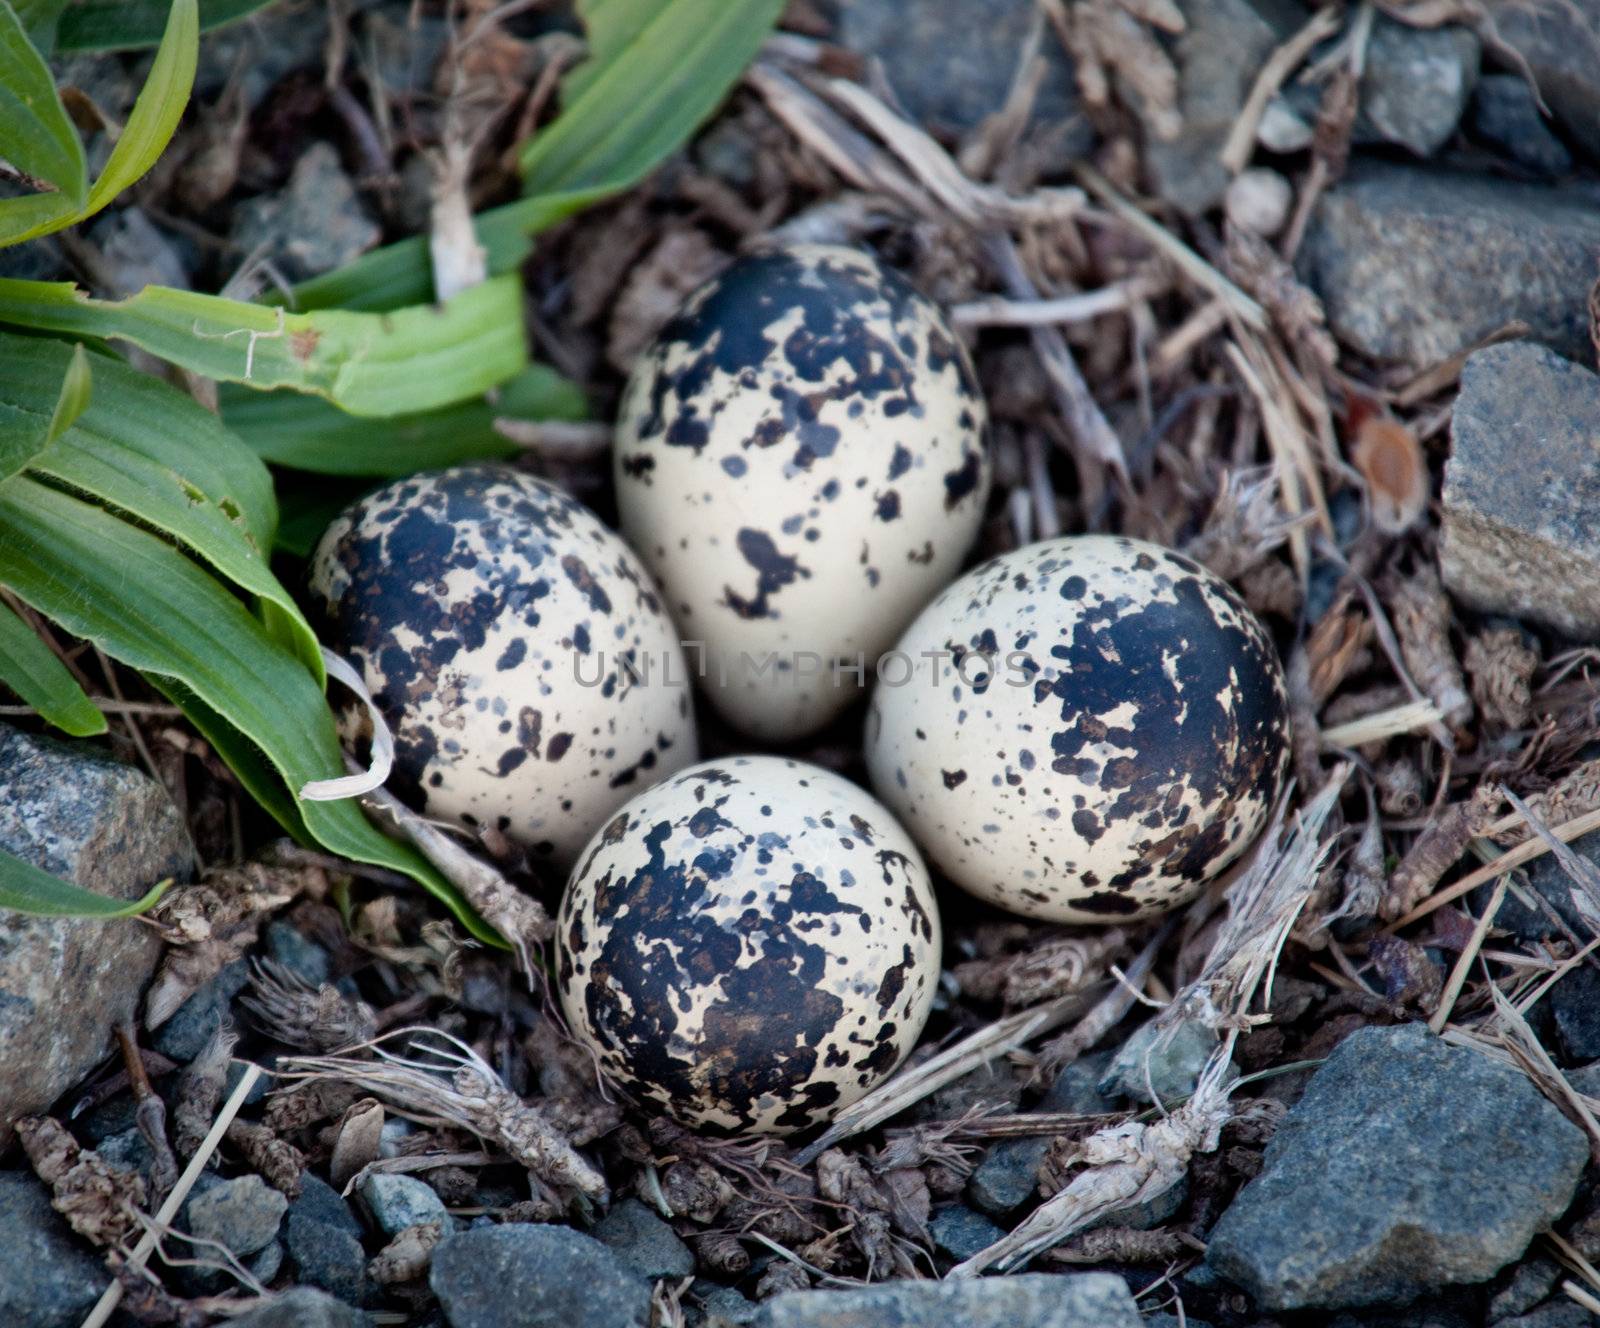 Four Killdeer eggs in gravel by side of road by steheap